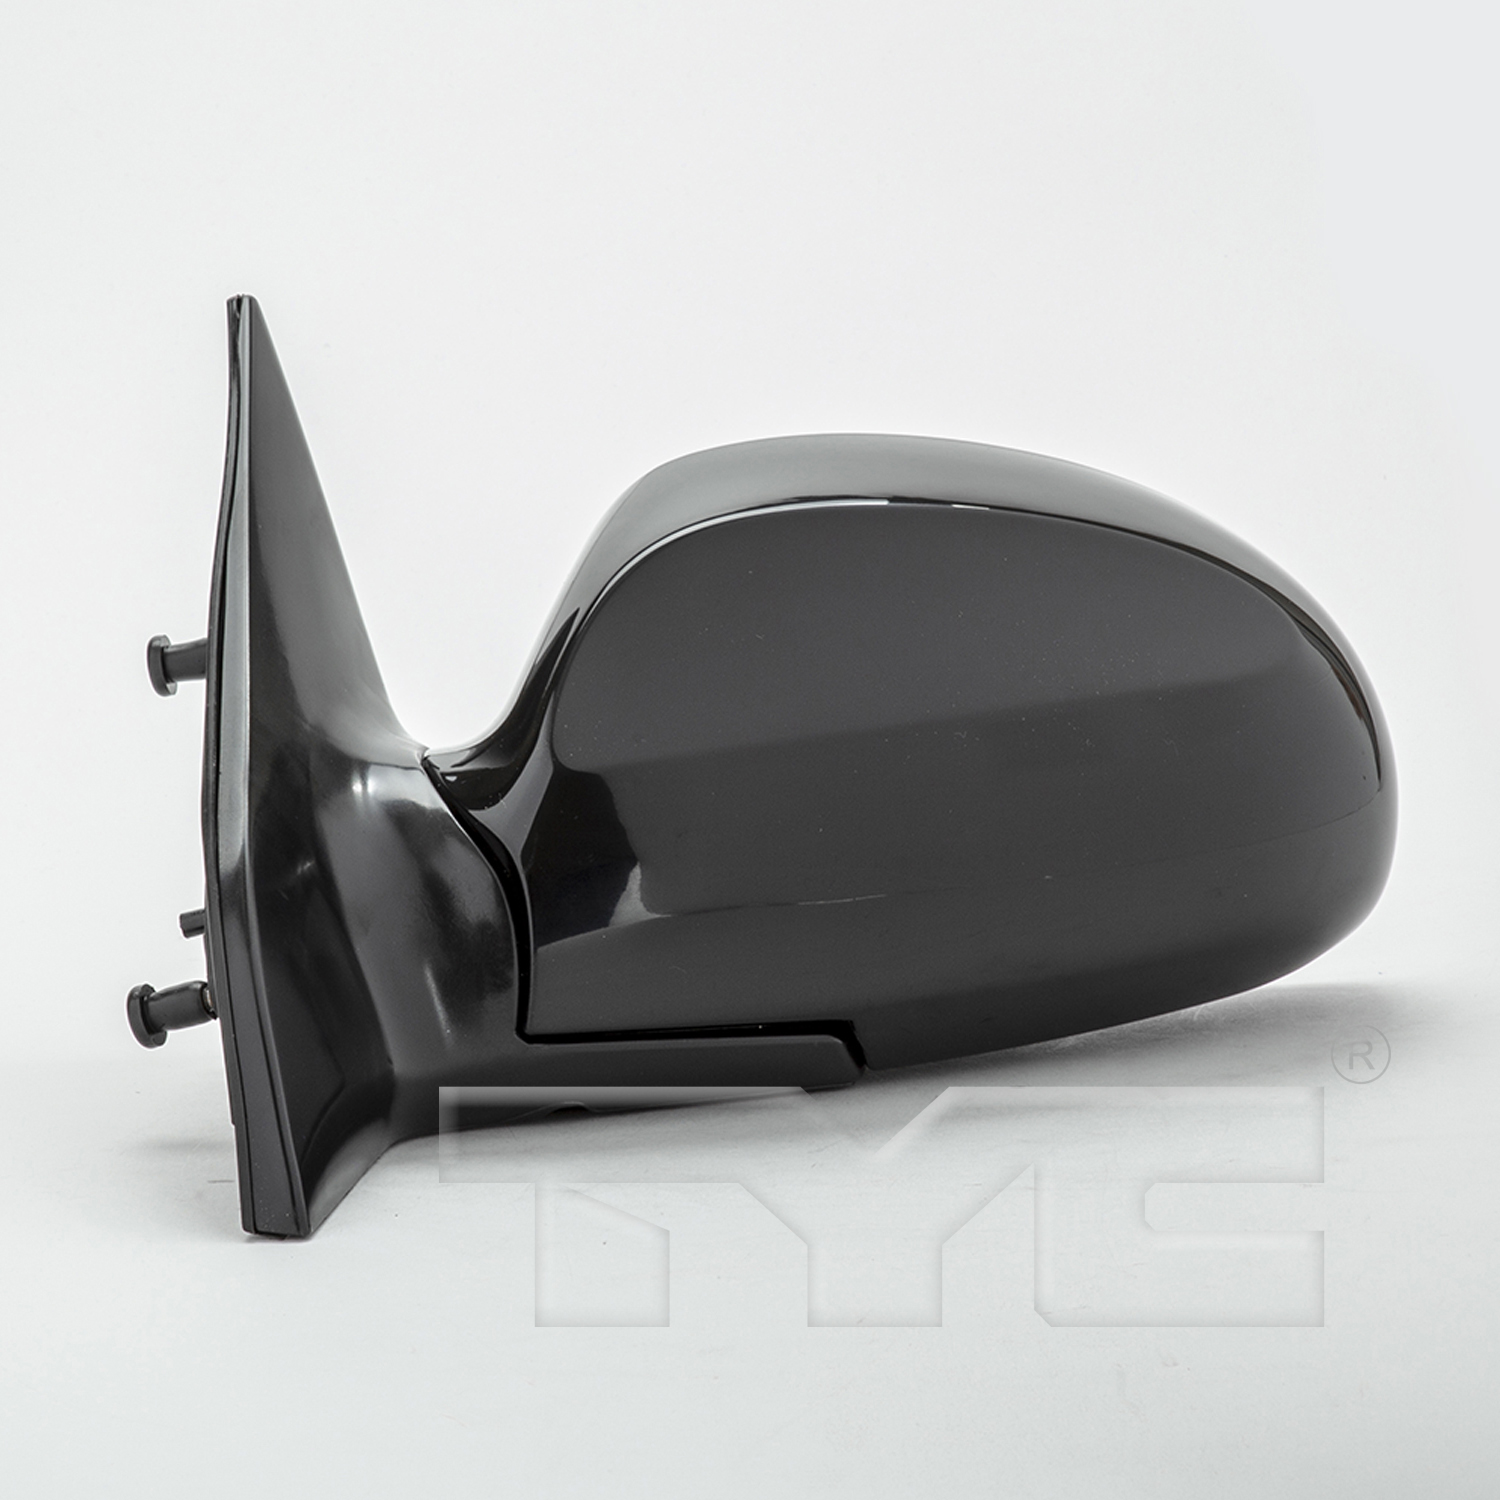 Aftermarket MIRRORS for KIA - SPECTRA5, SPECTRA5,05-07,LT Mirror outside rear view